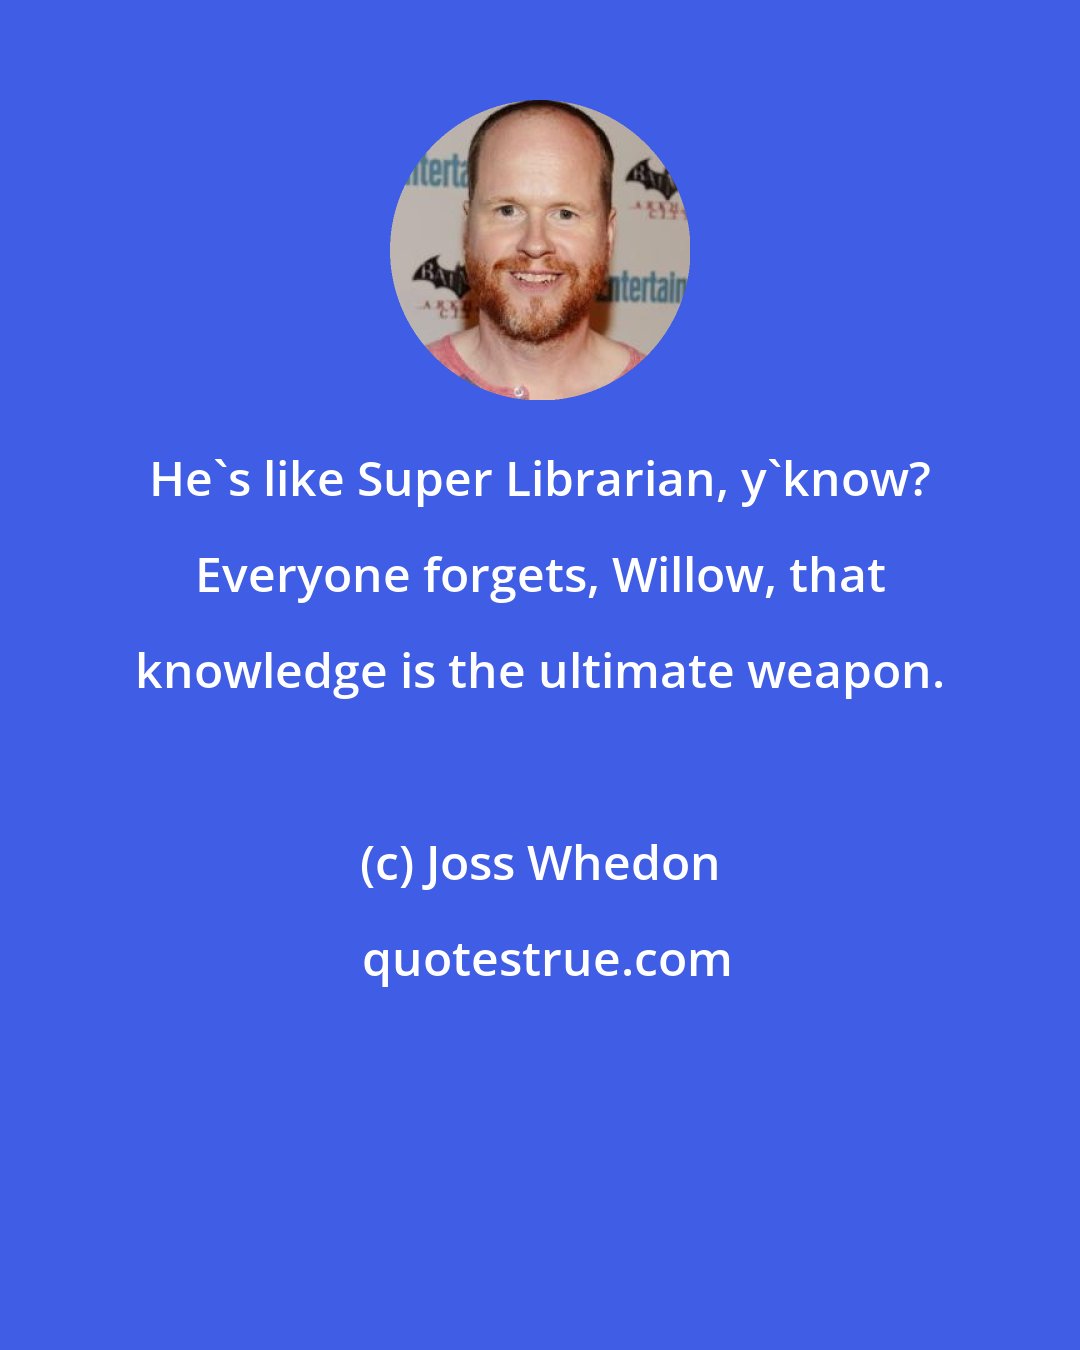 Joss Whedon: He's like Super Librarian, y'know? Everyone forgets, Willow, that knowledge is the ultimate weapon.